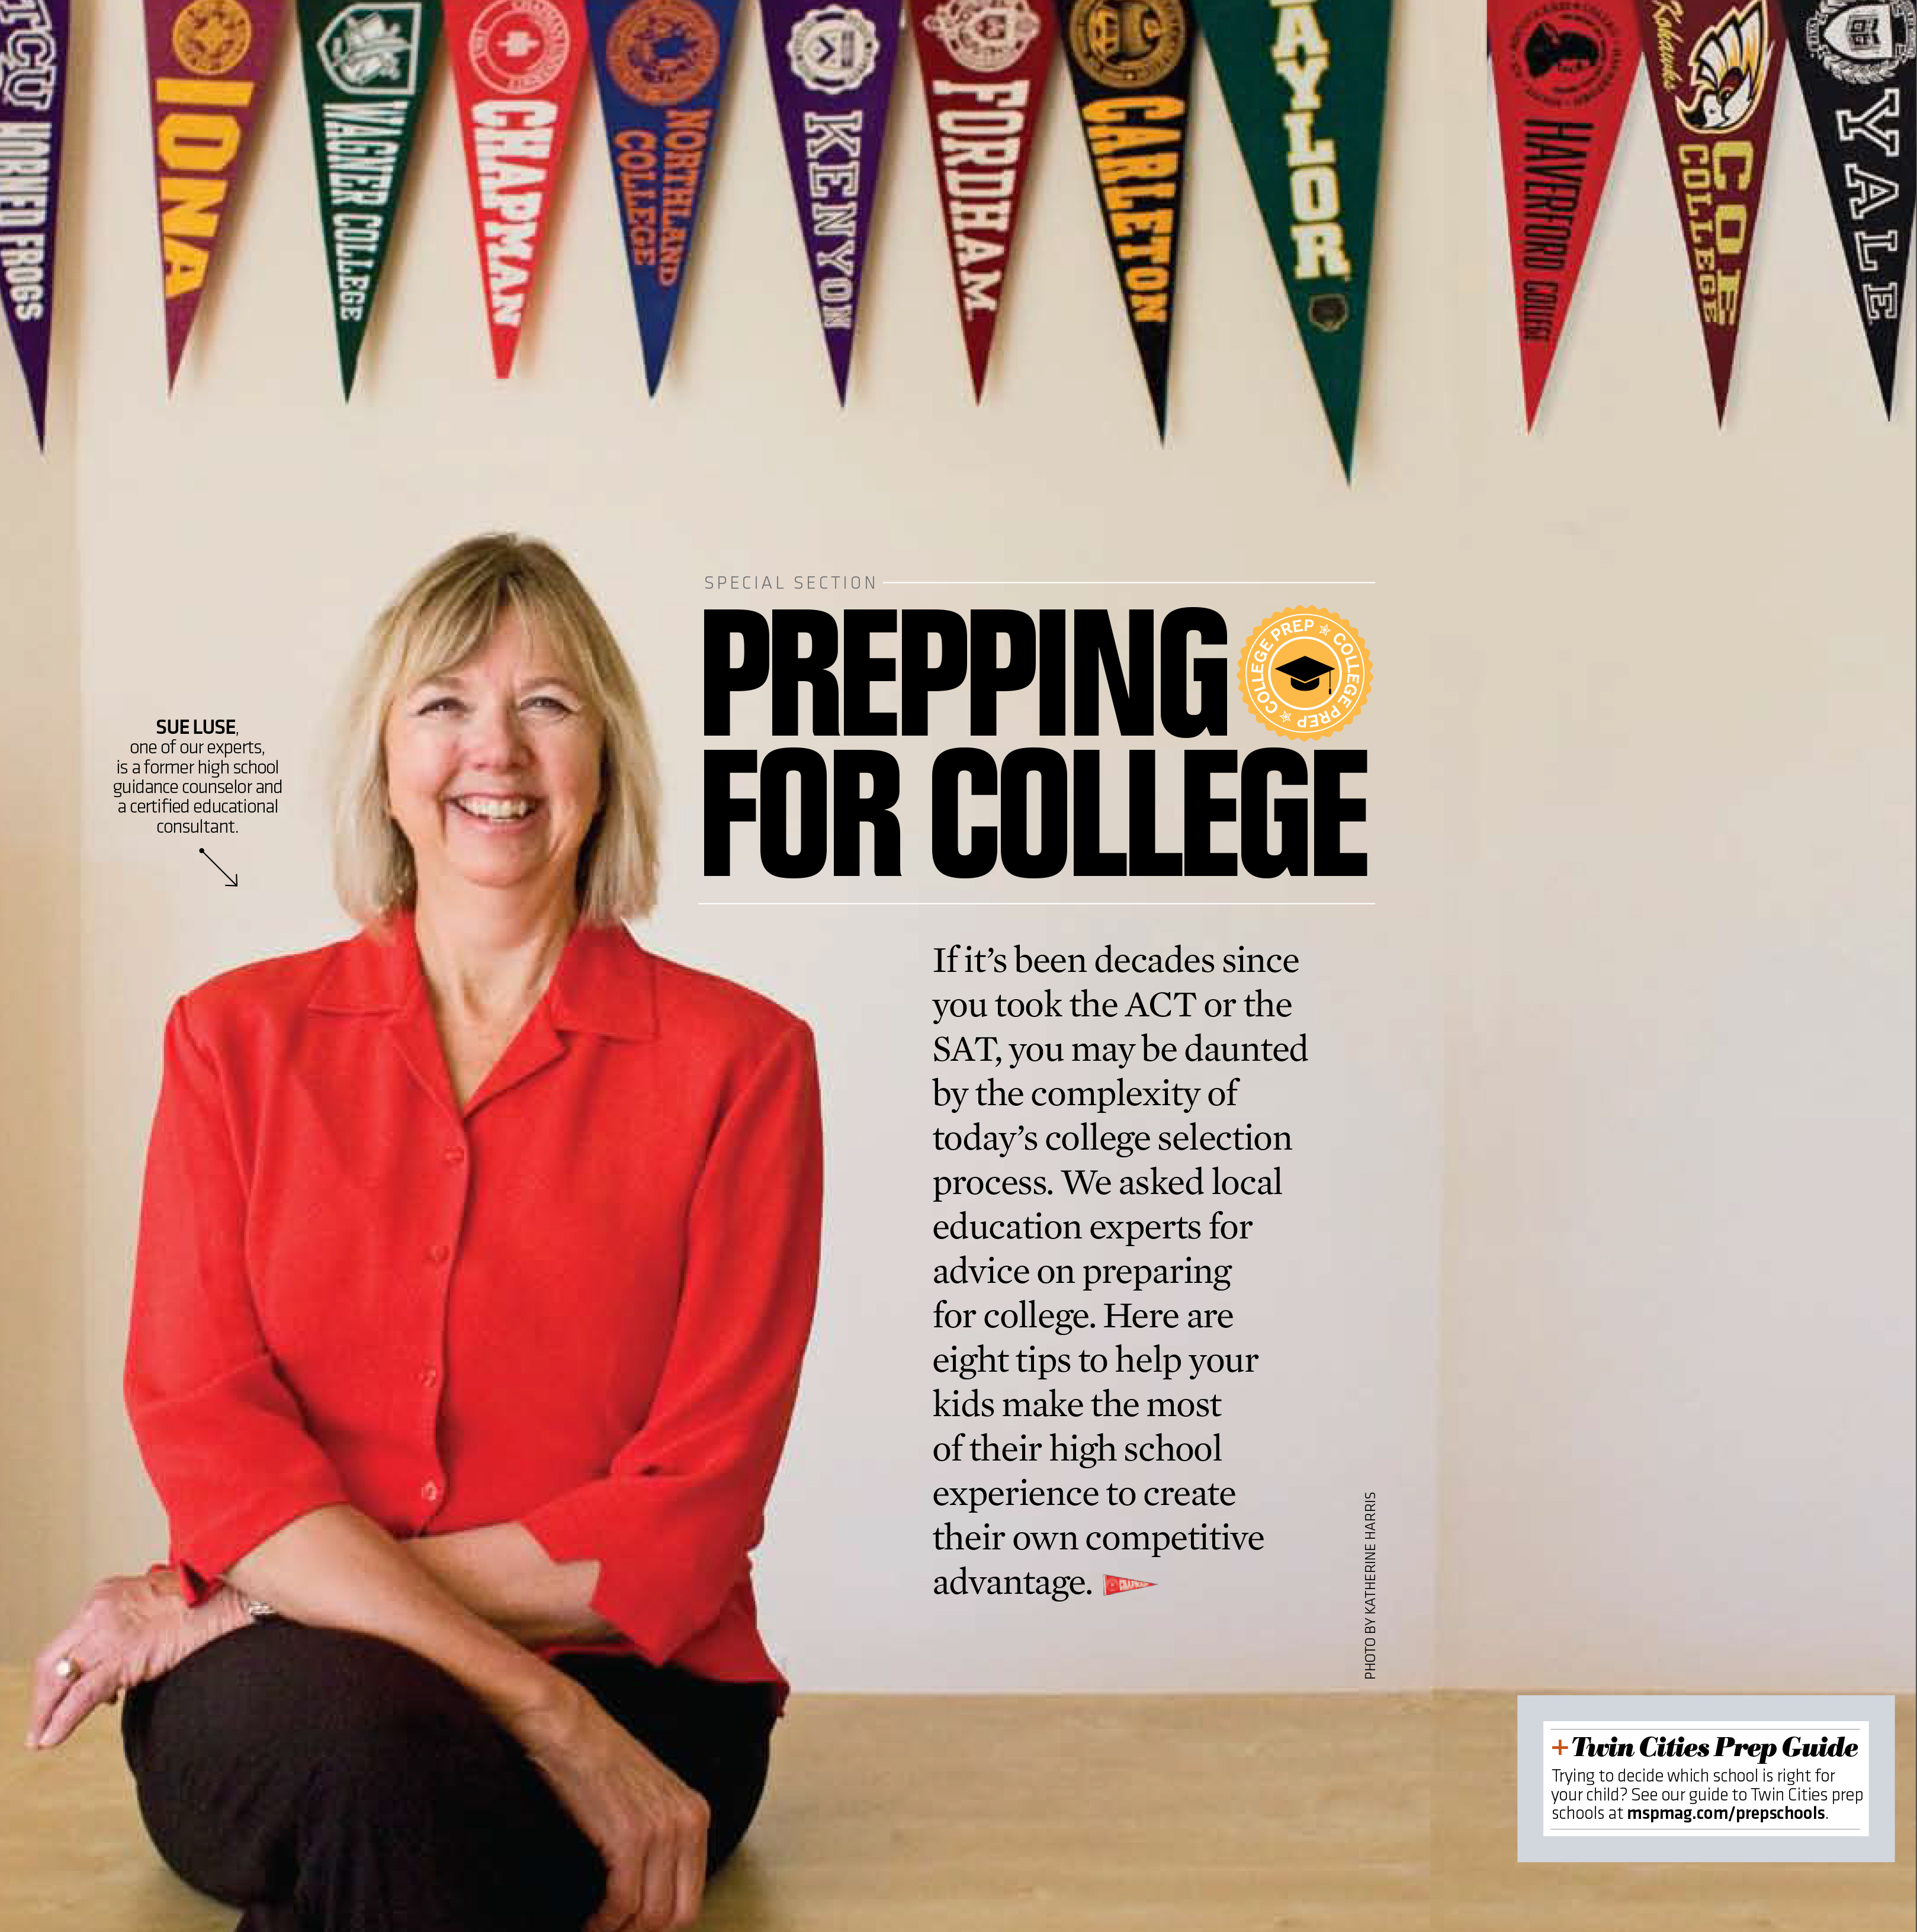 MSP Magazine Story about Sue Luse